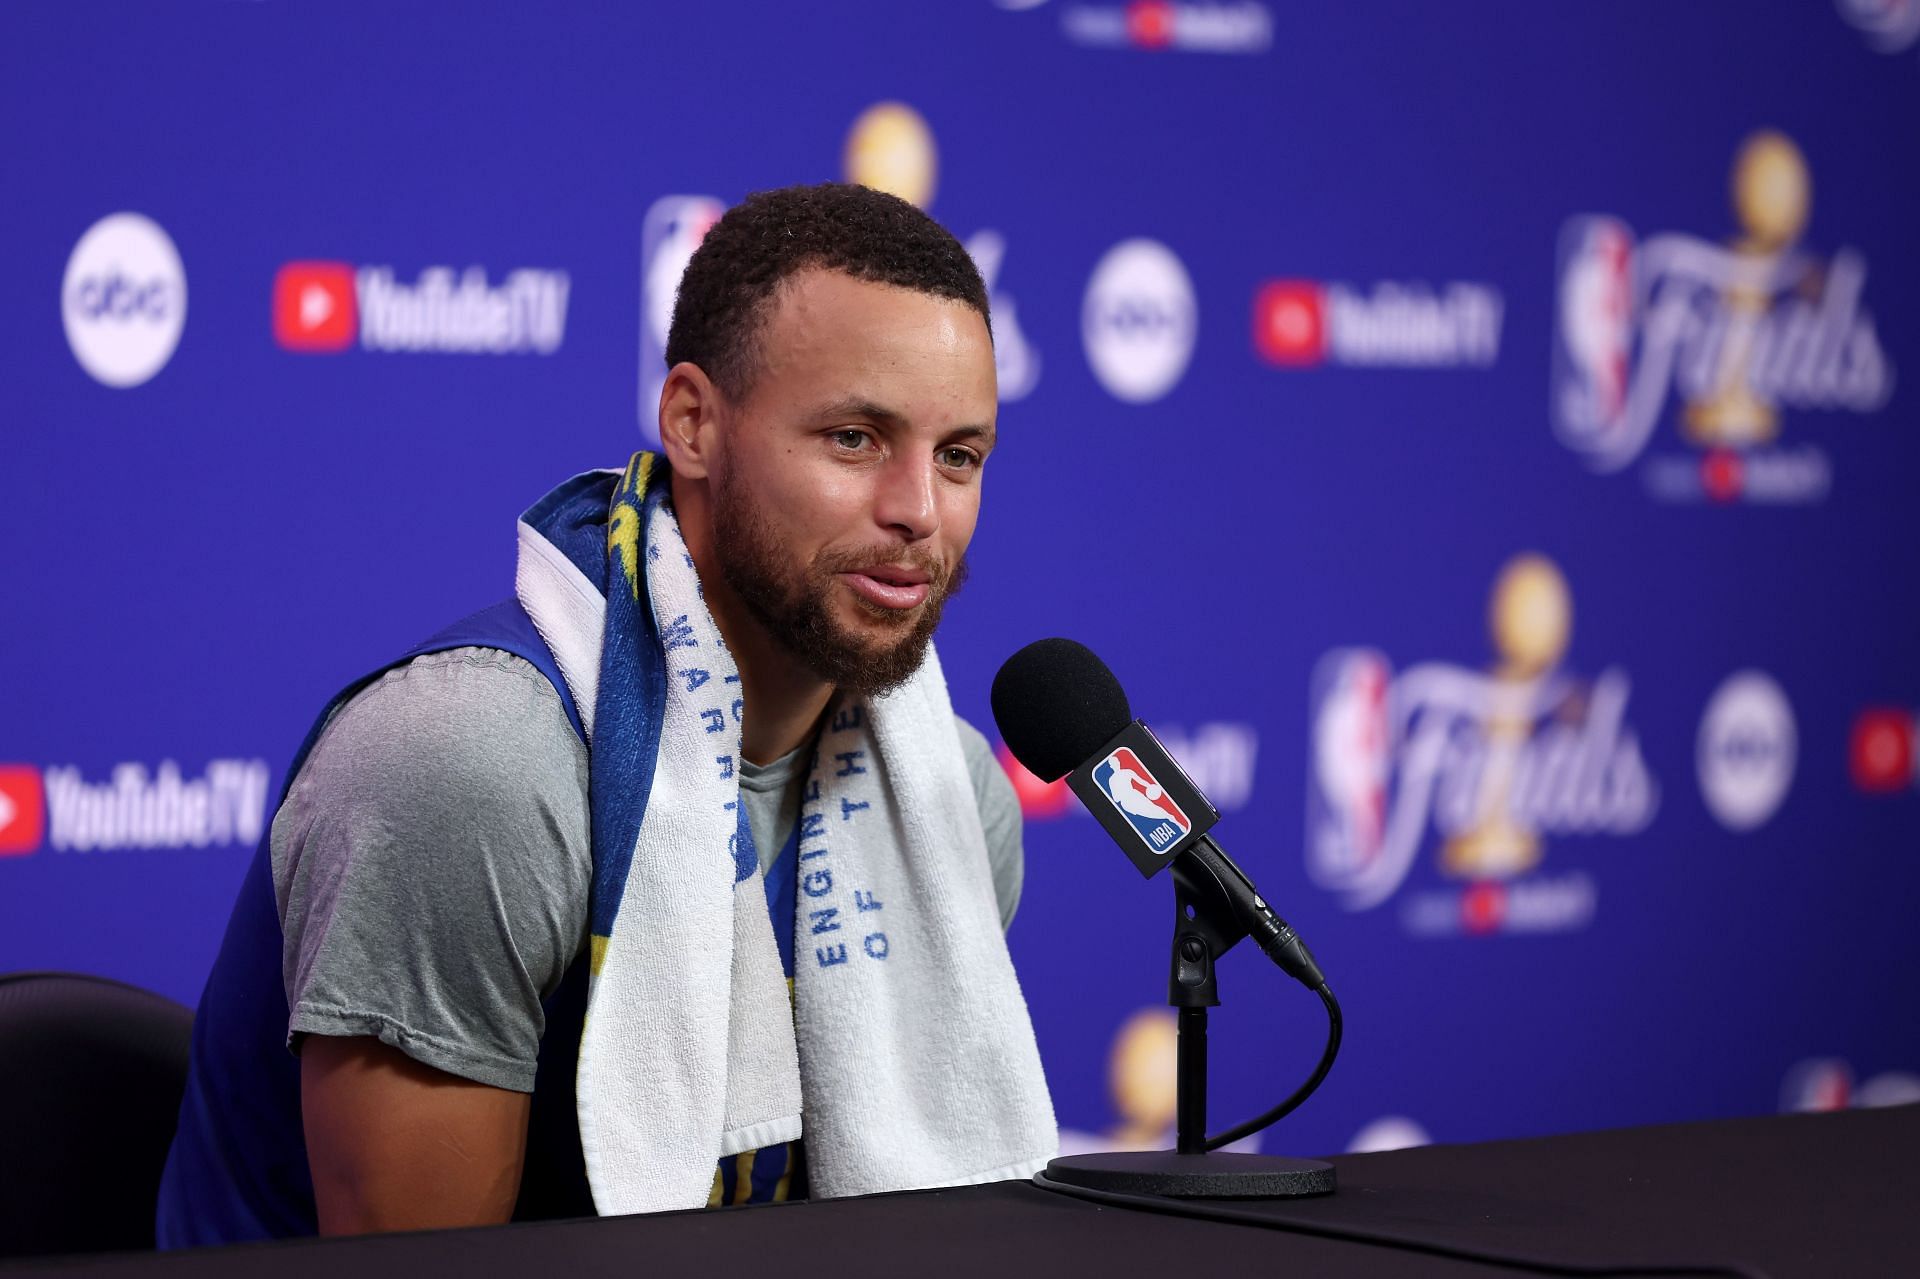 Steph Curry at the 2022 NBA Finals media day.